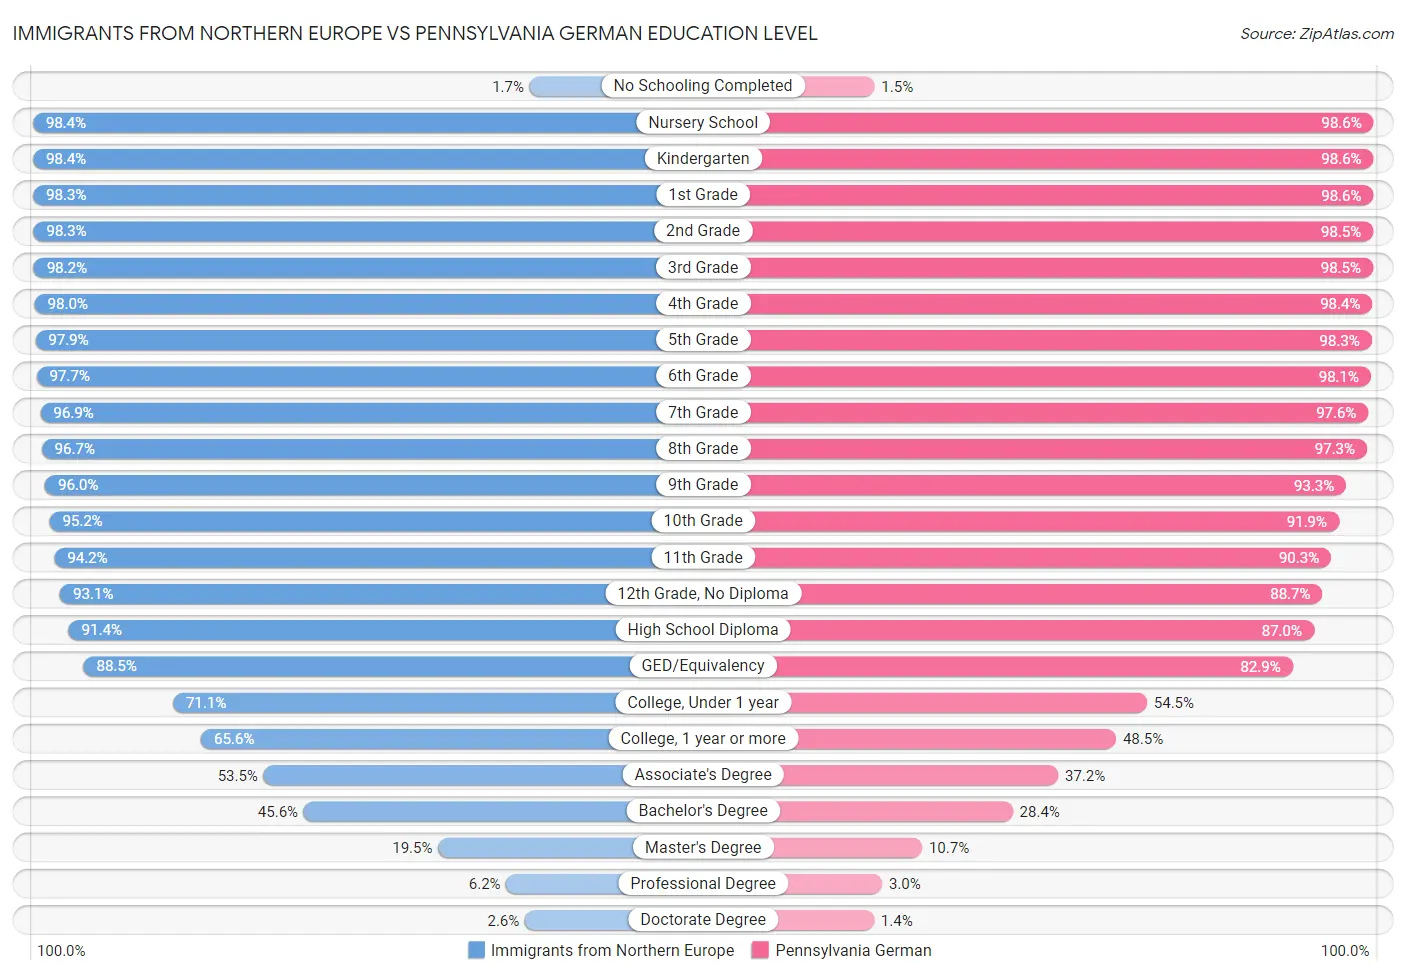 Immigrants from Northern Europe vs Pennsylvania German Education Level